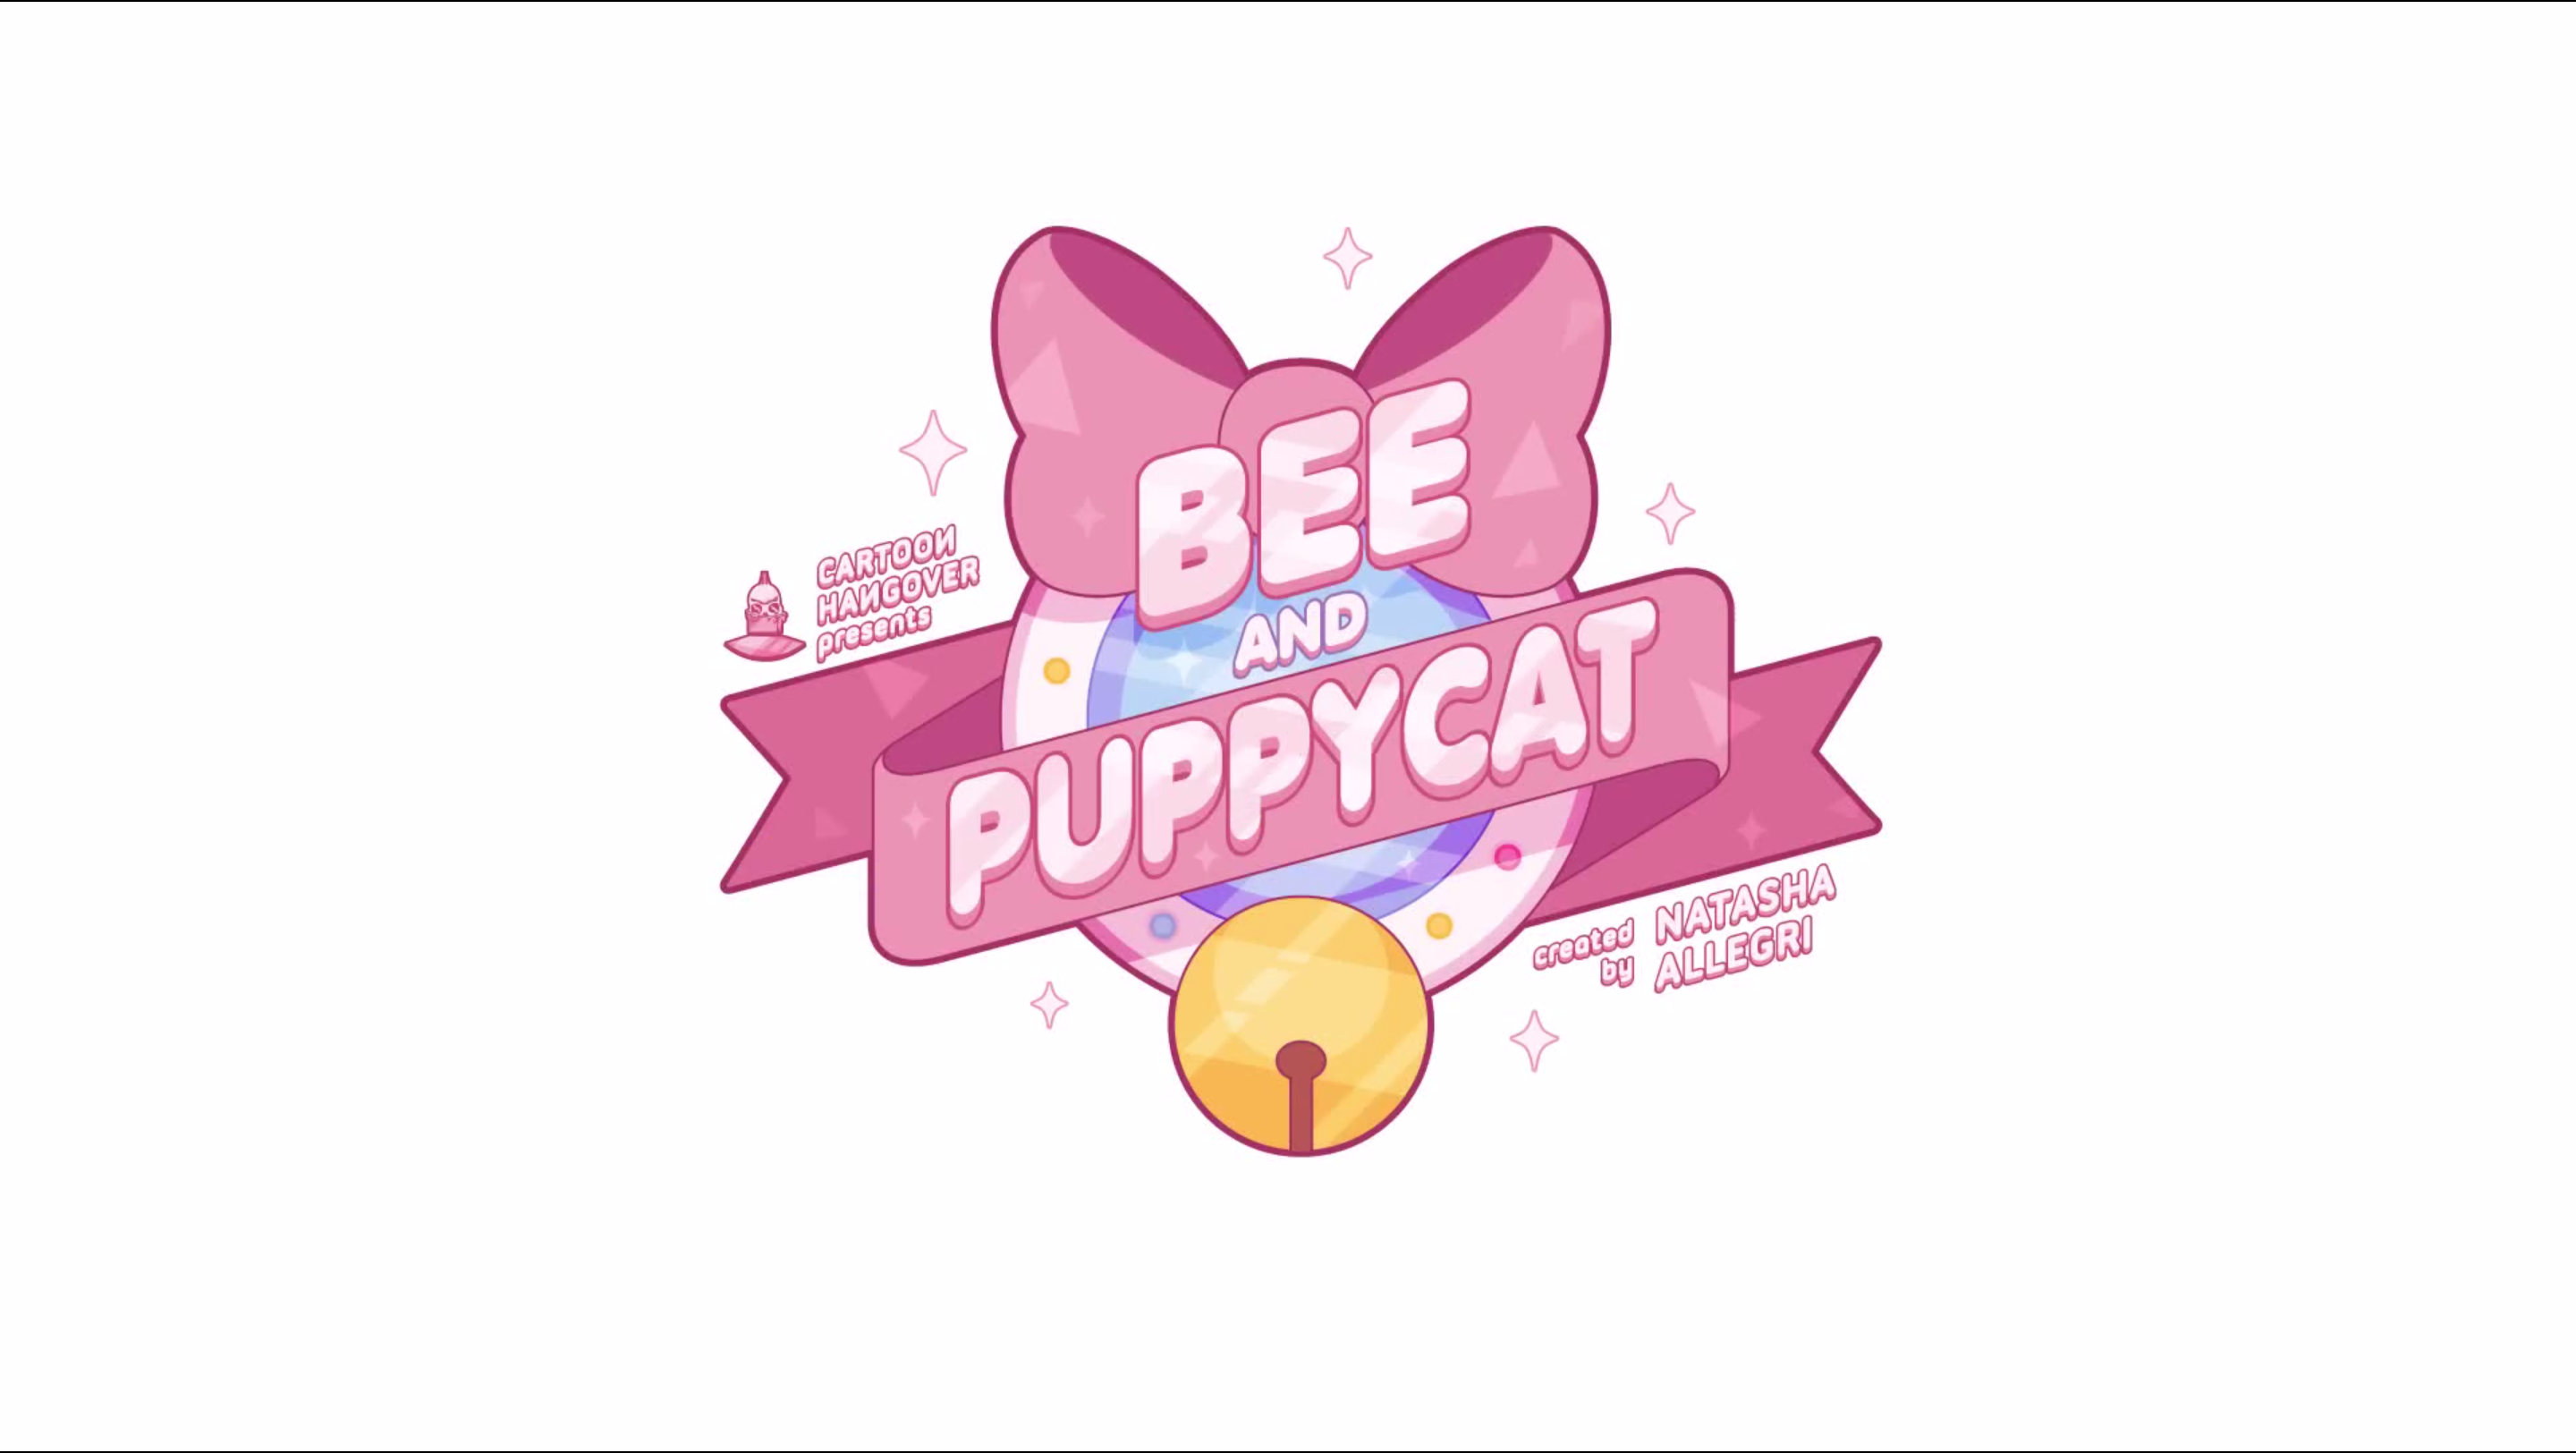 Bee_and_PuppyCat